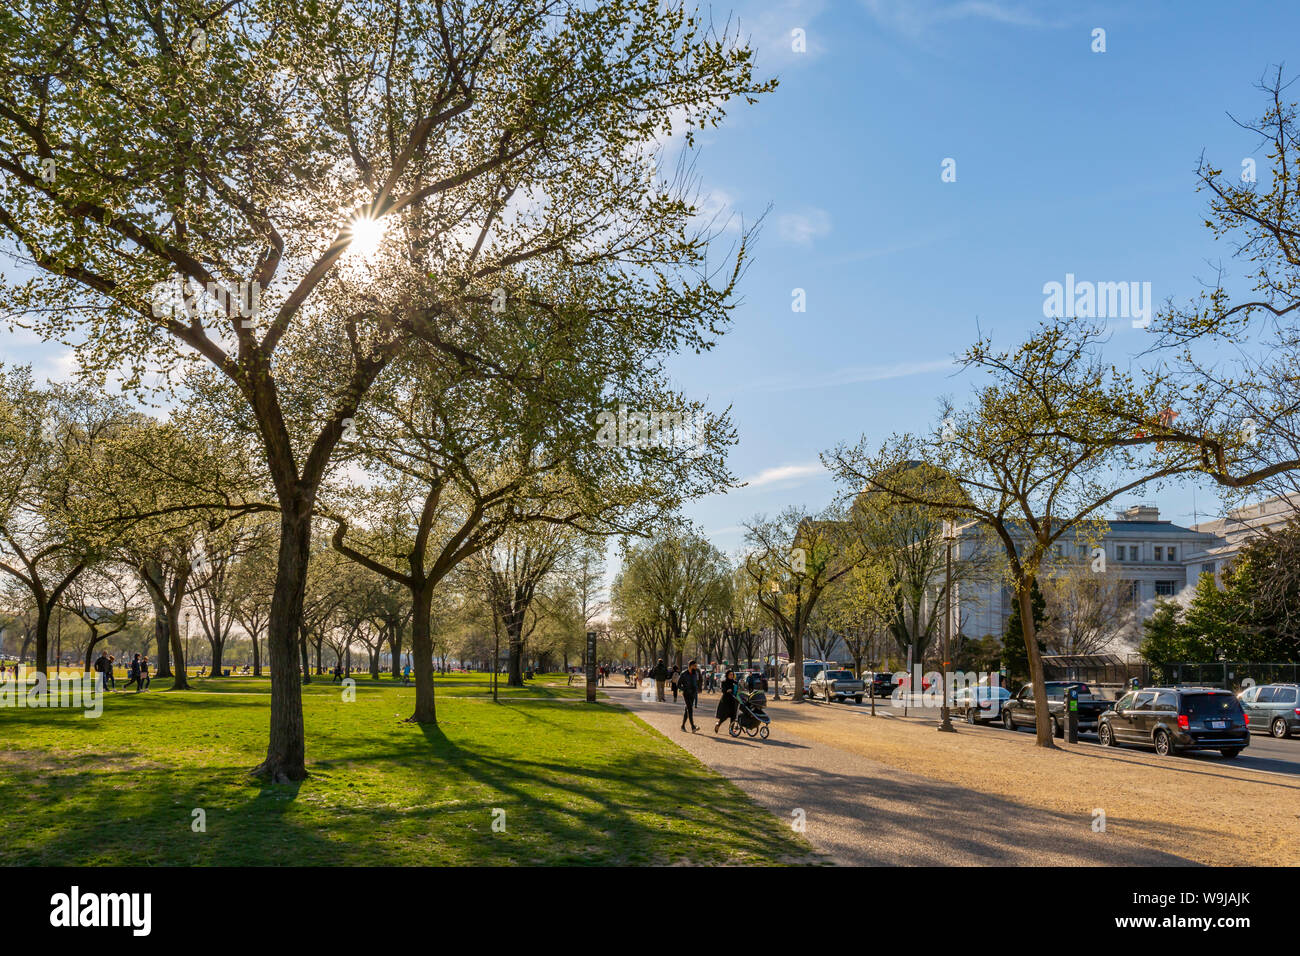 View of Smithsonian National Museum of Natural History and National Mall in spring, Washington D.C., United States of America, North America Stock Photo